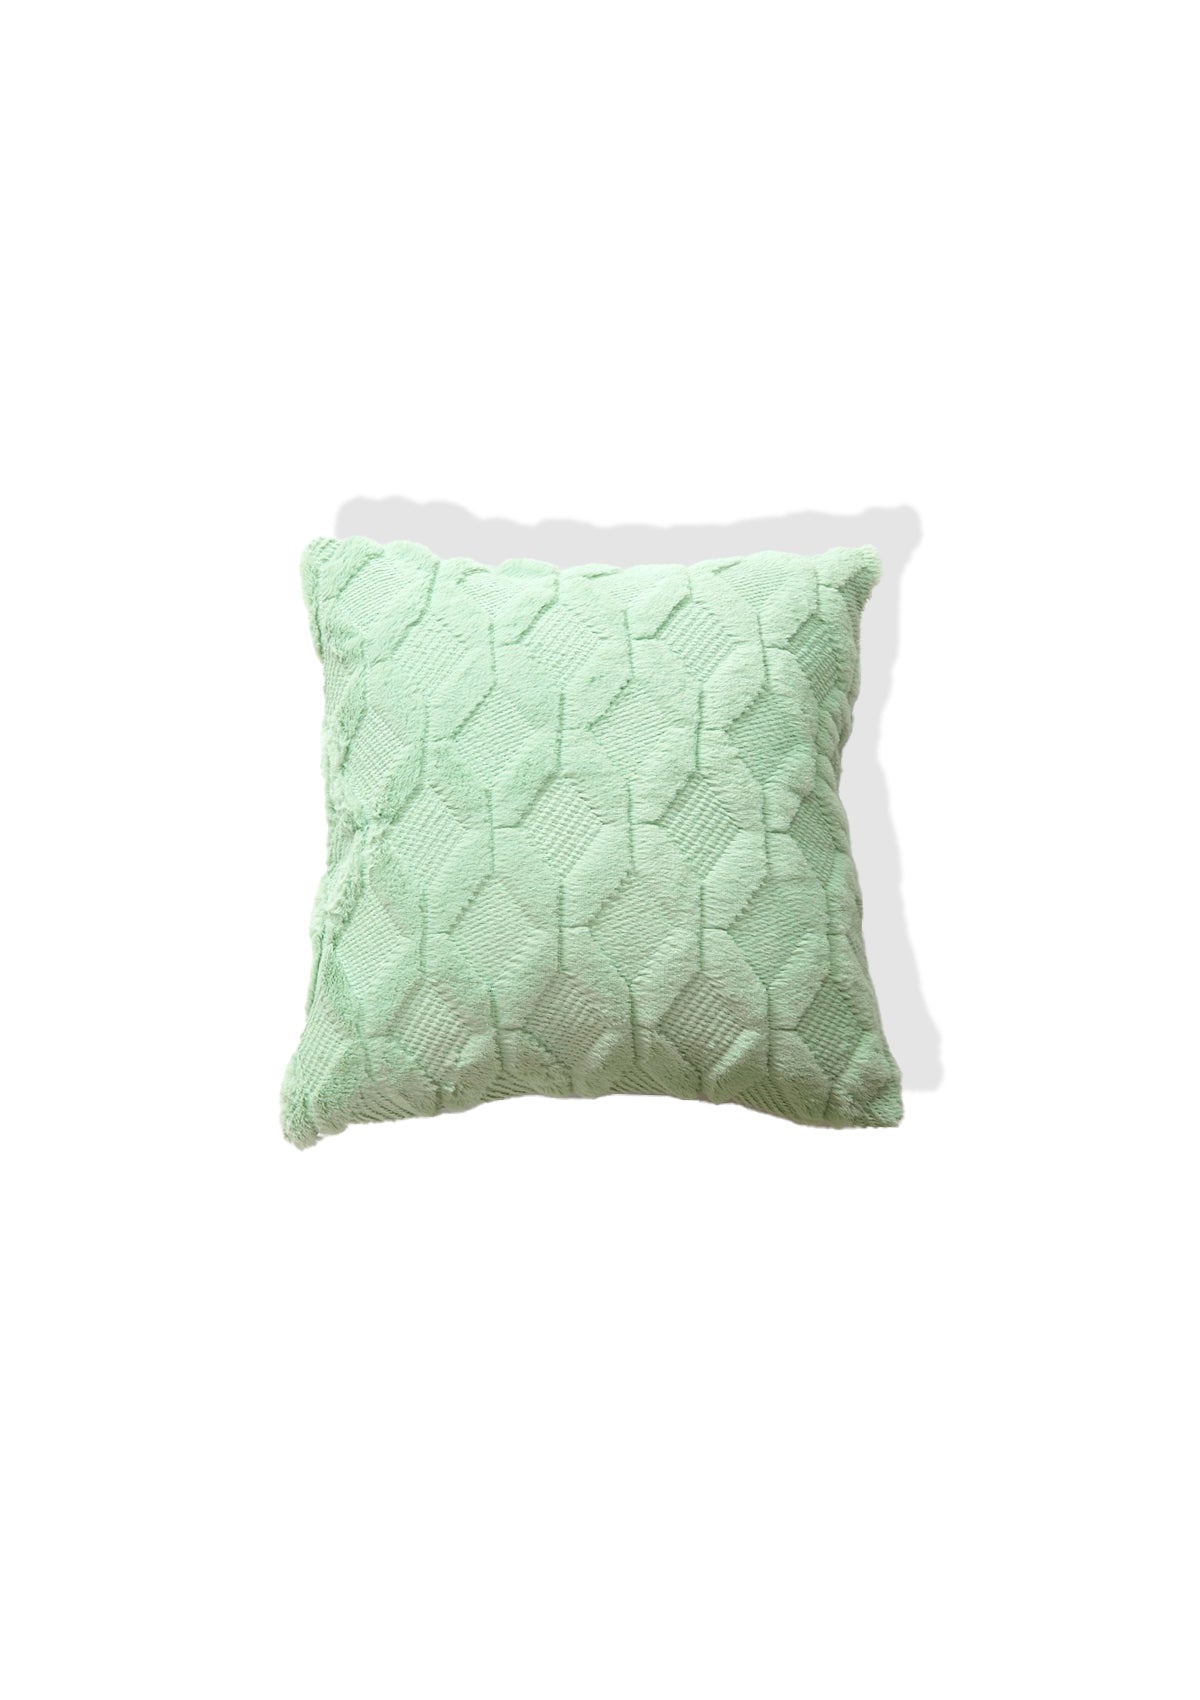 Green Serenity Fluffy Cushion Covers | CovermyCushion